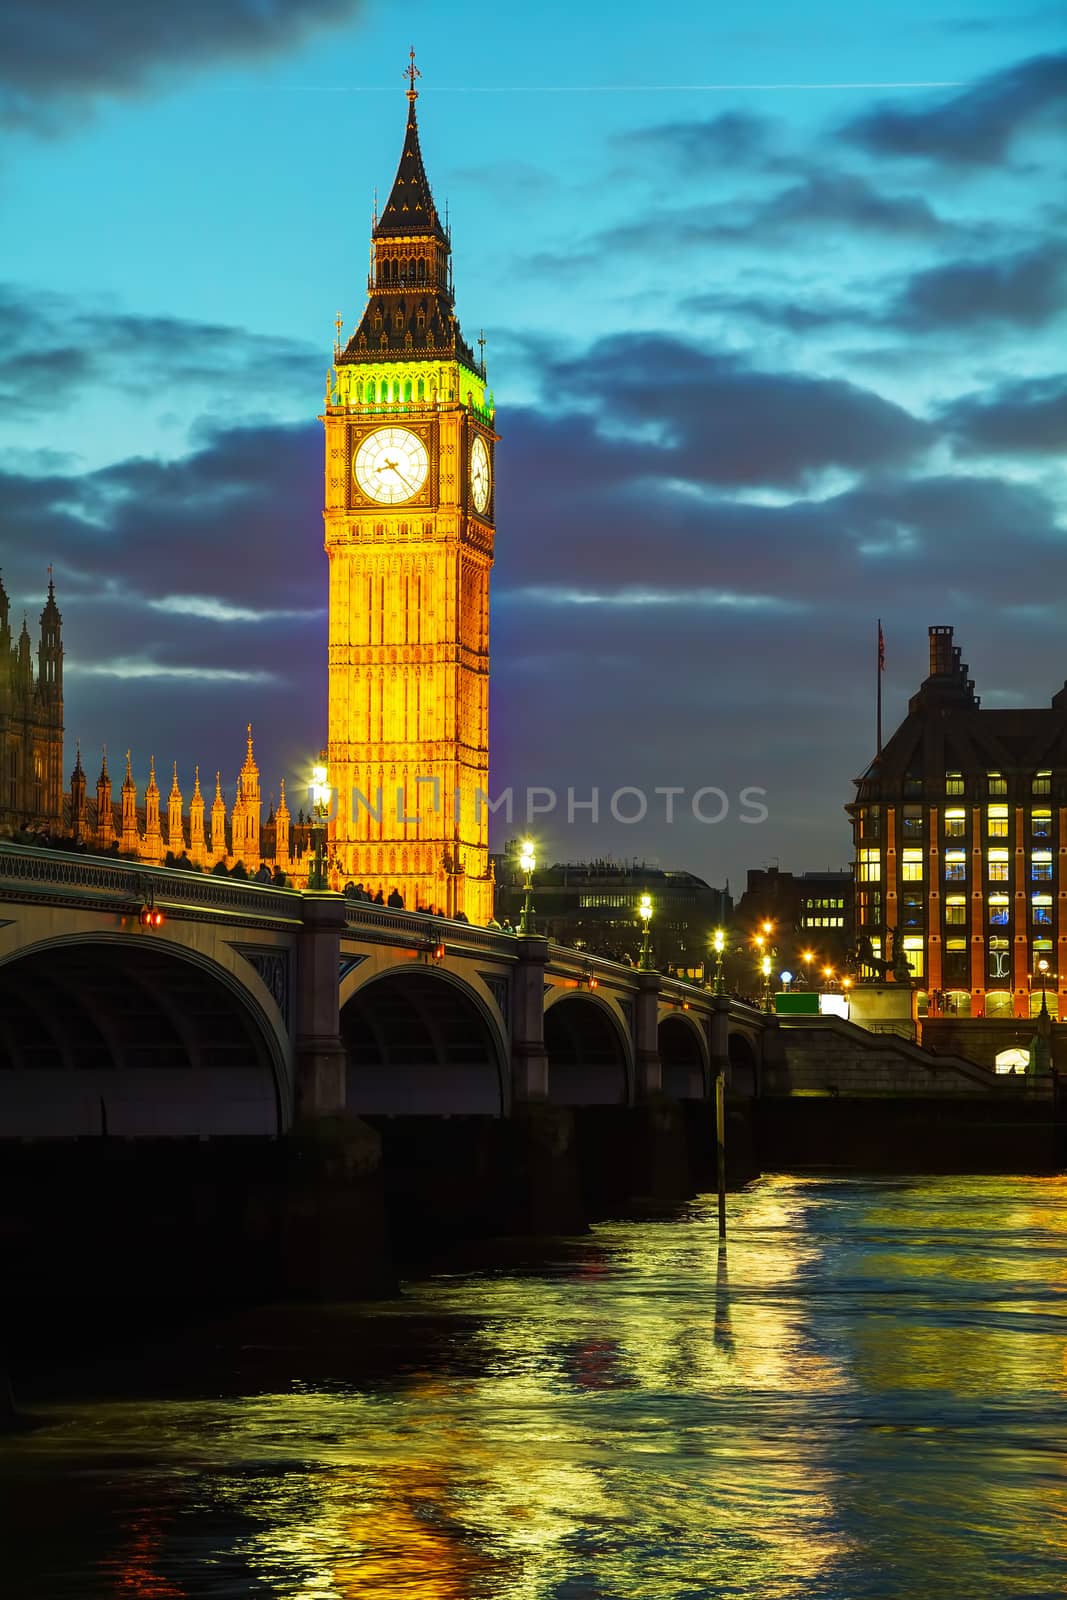 Overview of London with the Elizabeth Tower by AndreyKr